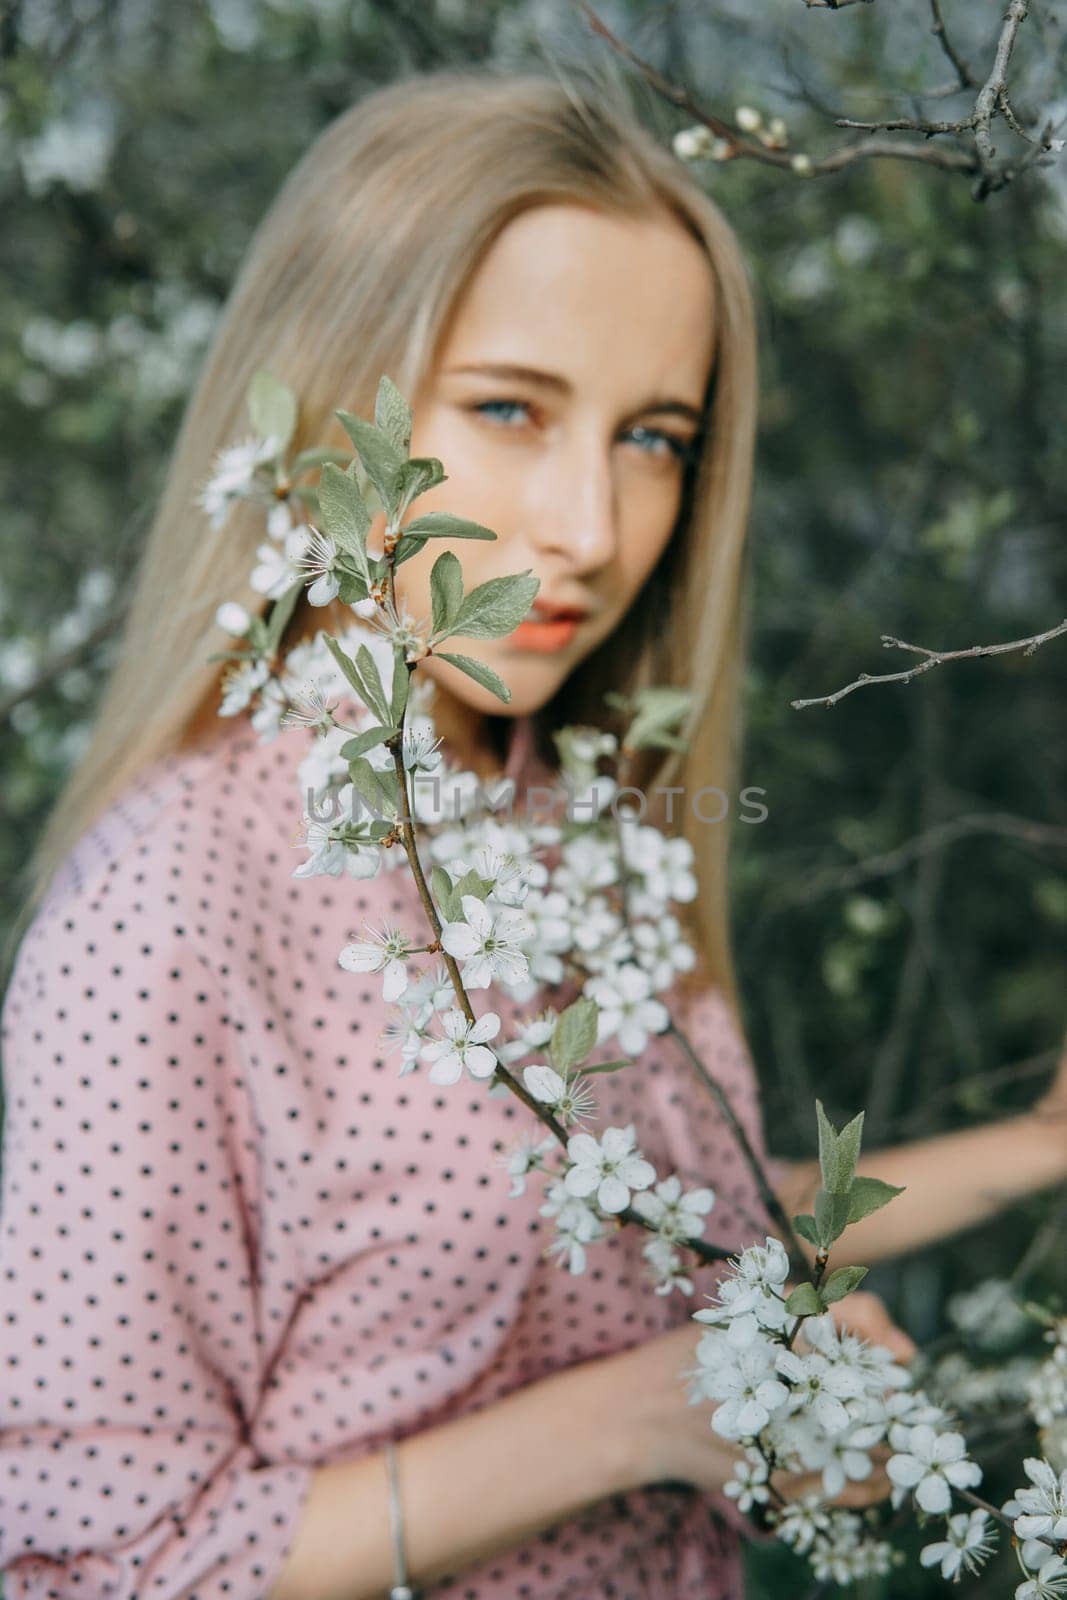 Blonde girl on a spring walk in the garden with cherry blossoms. Female portrait, close-up. A girl in a pink polka dot dress. by Annu1tochka